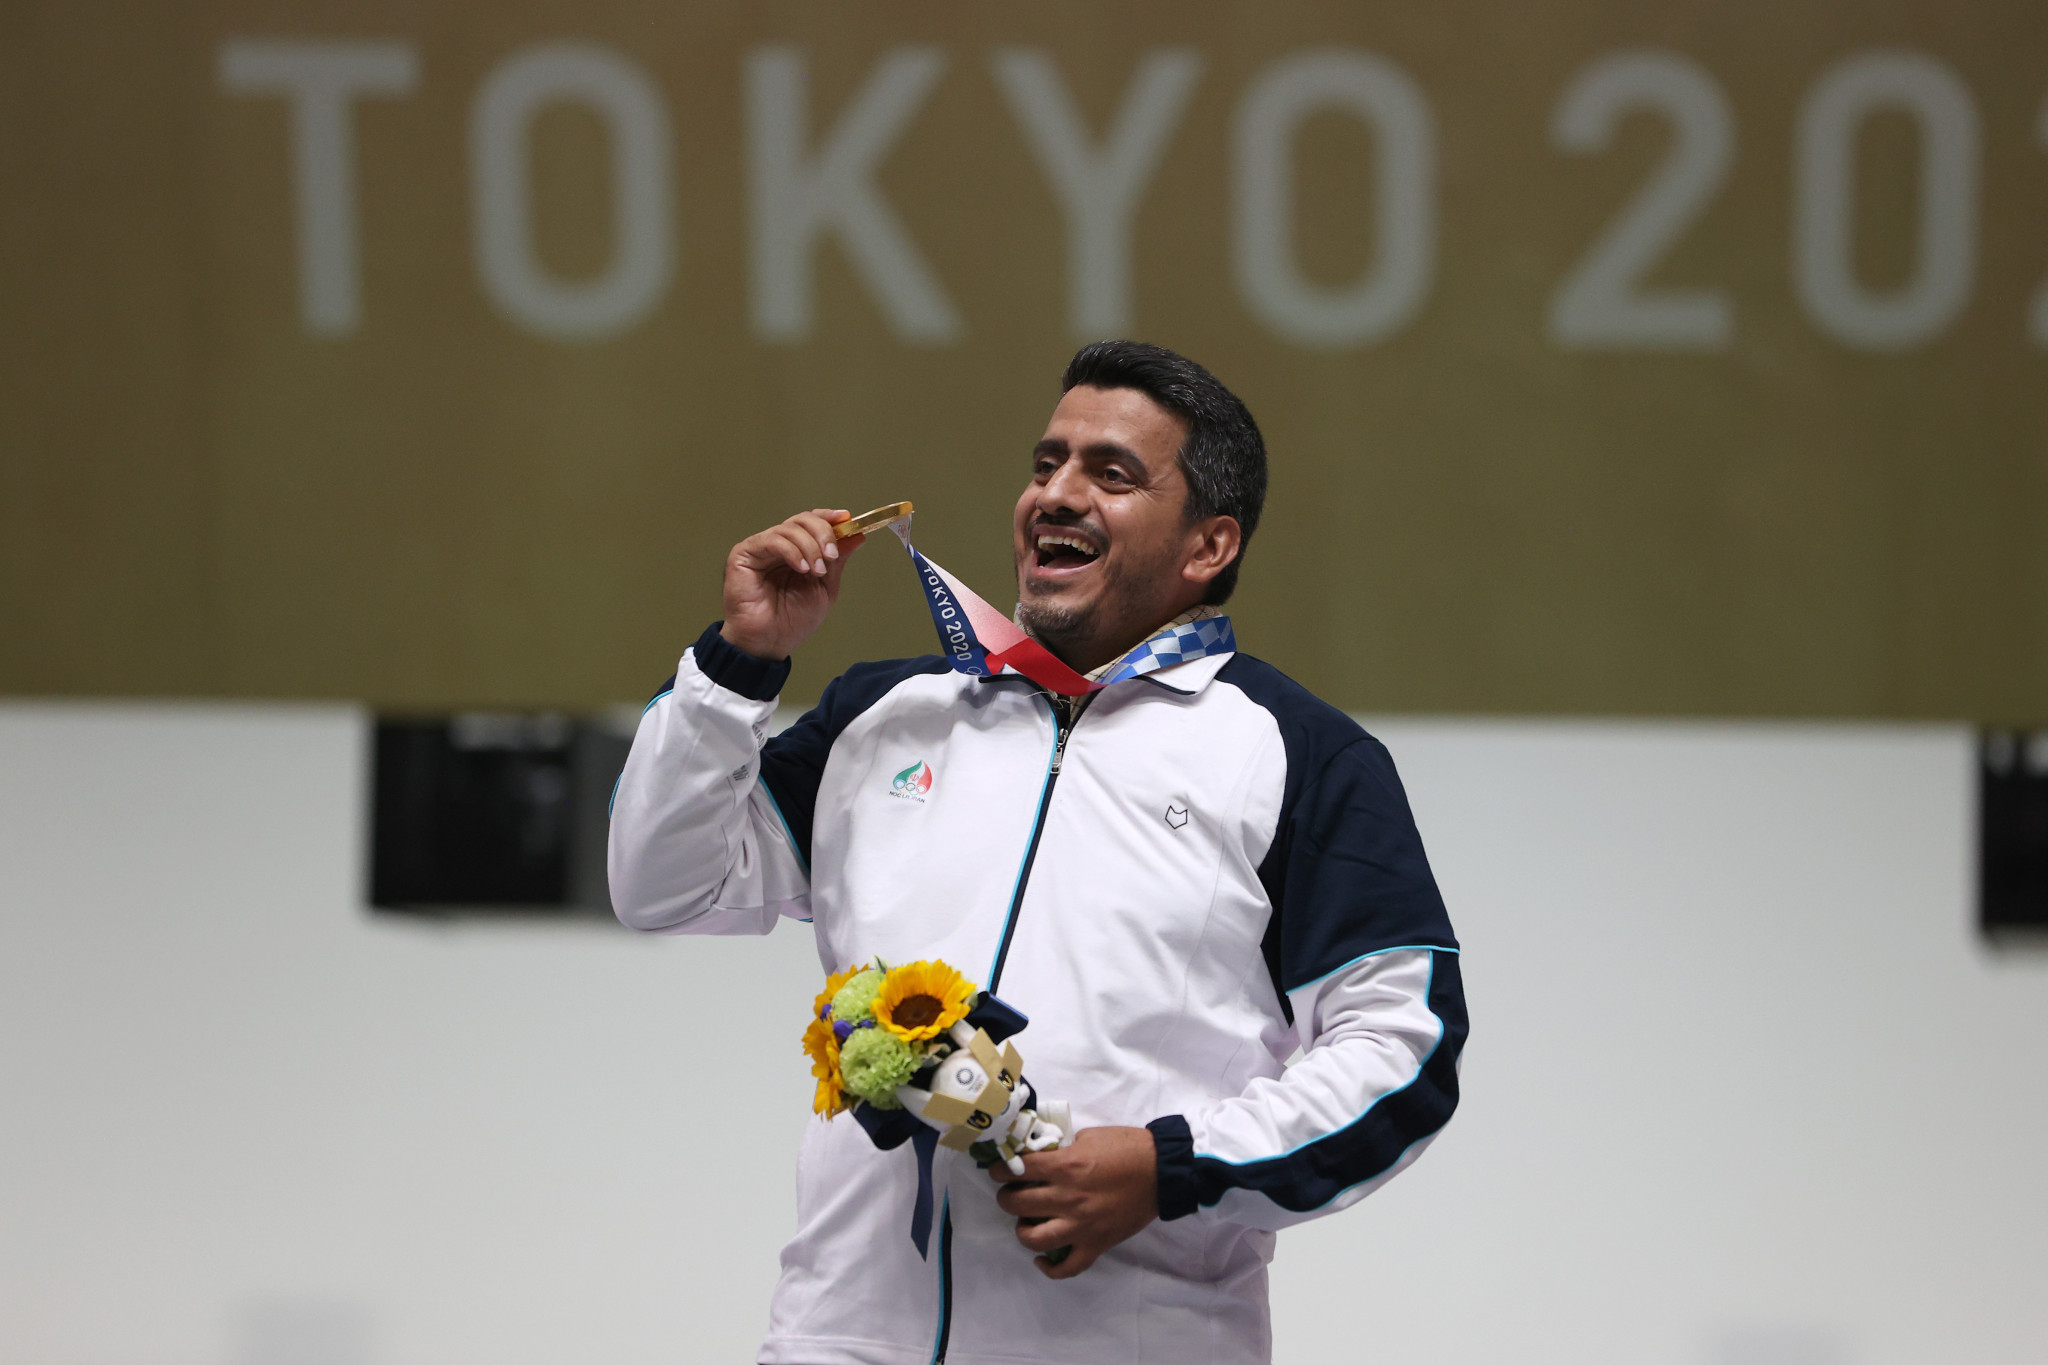 Javad Foroughi became Iran's oldest Olympic medallist and its first in shooting when he won gold in the 10m air pistol at Tokyo 2020 ©Getty Images